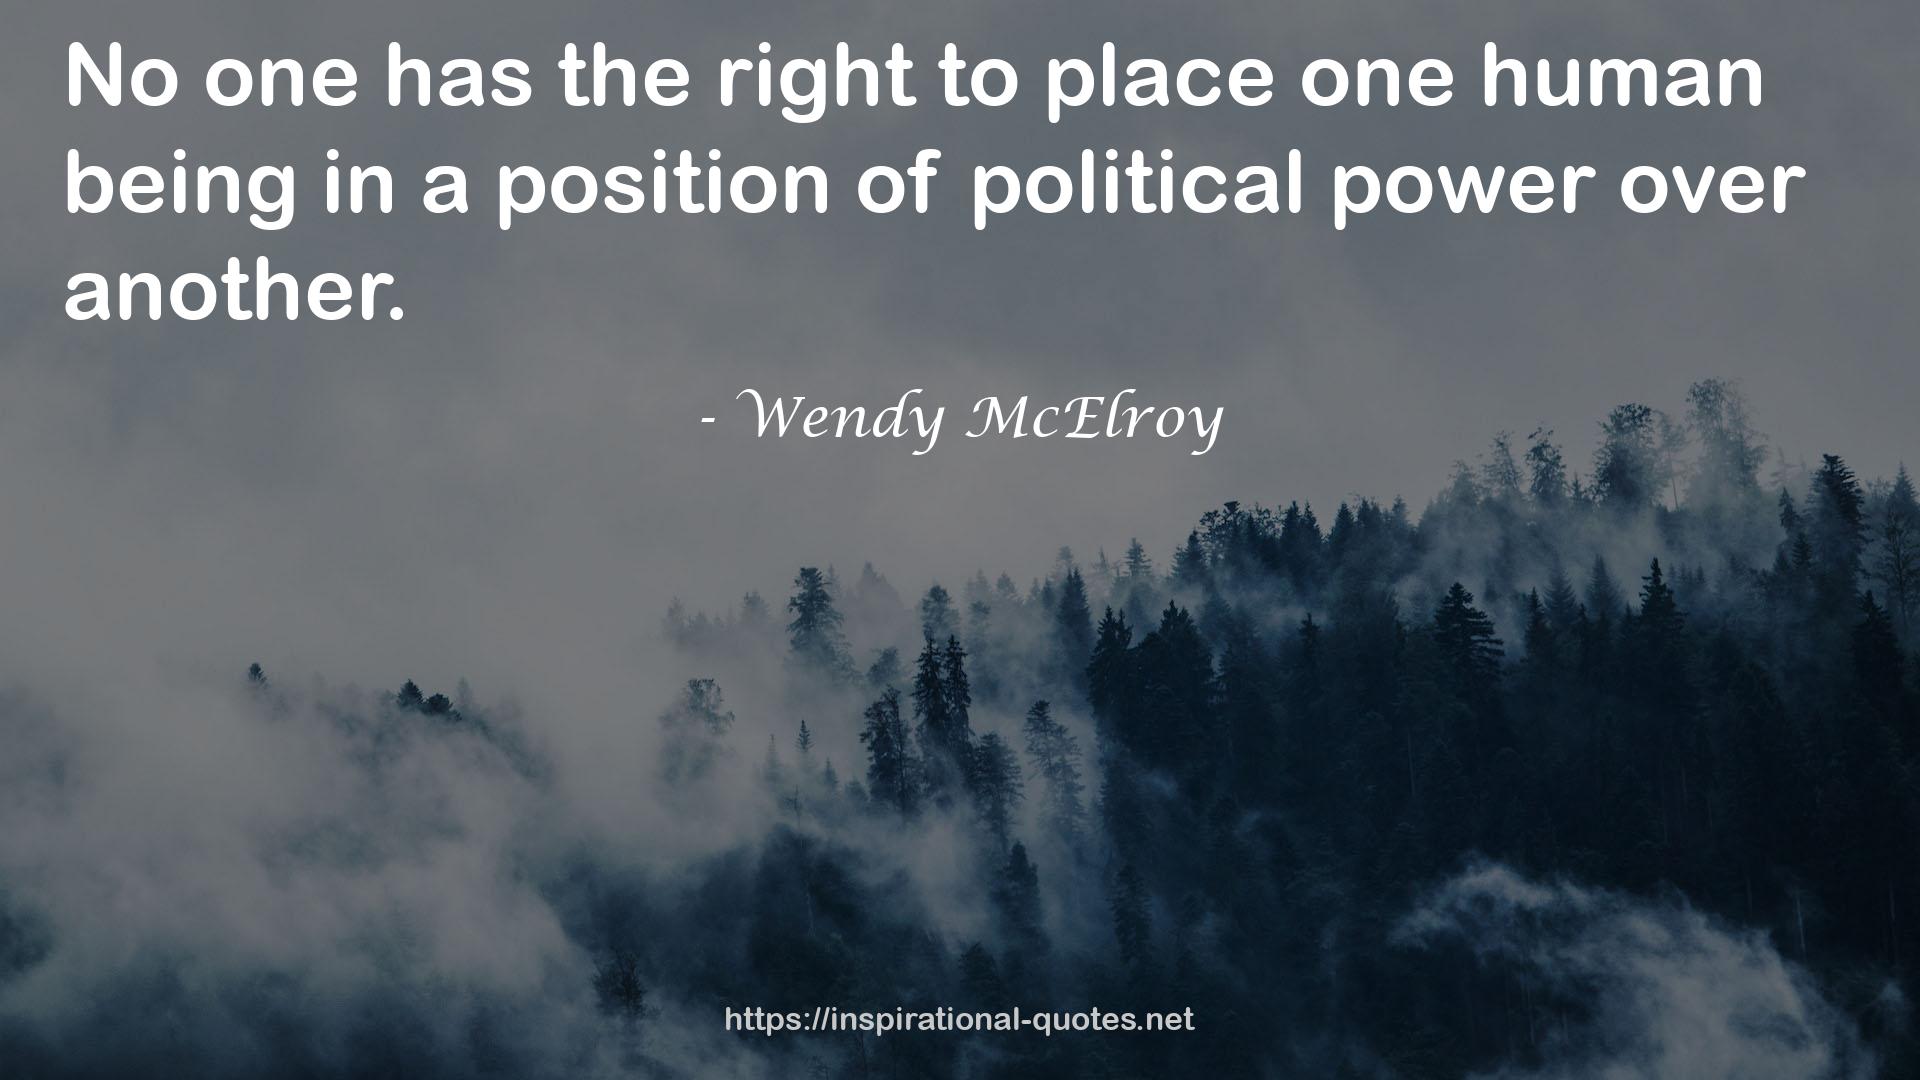 Wendy McElroy QUOTES